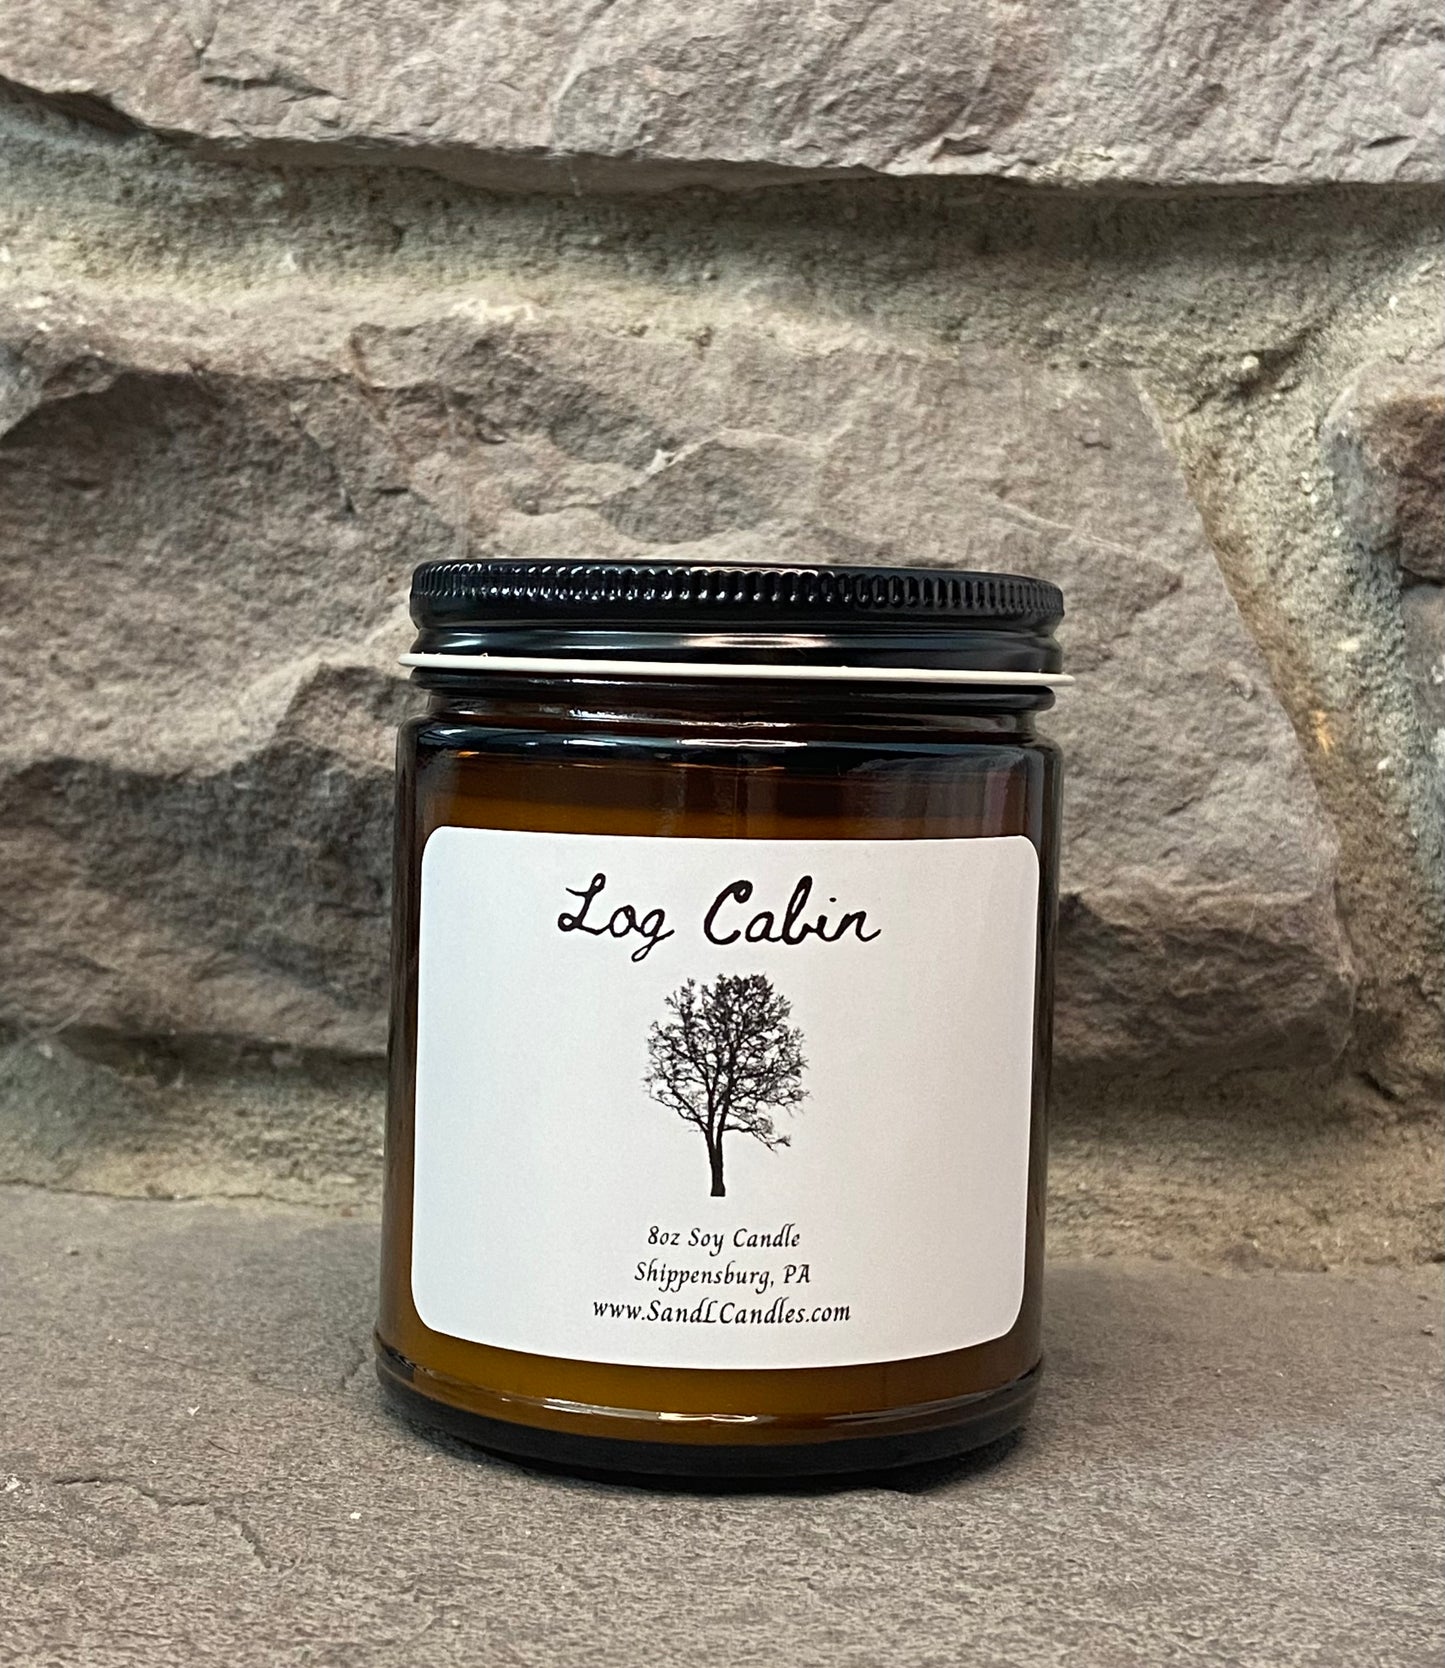 Log Cabin Single Wick Soy Candle